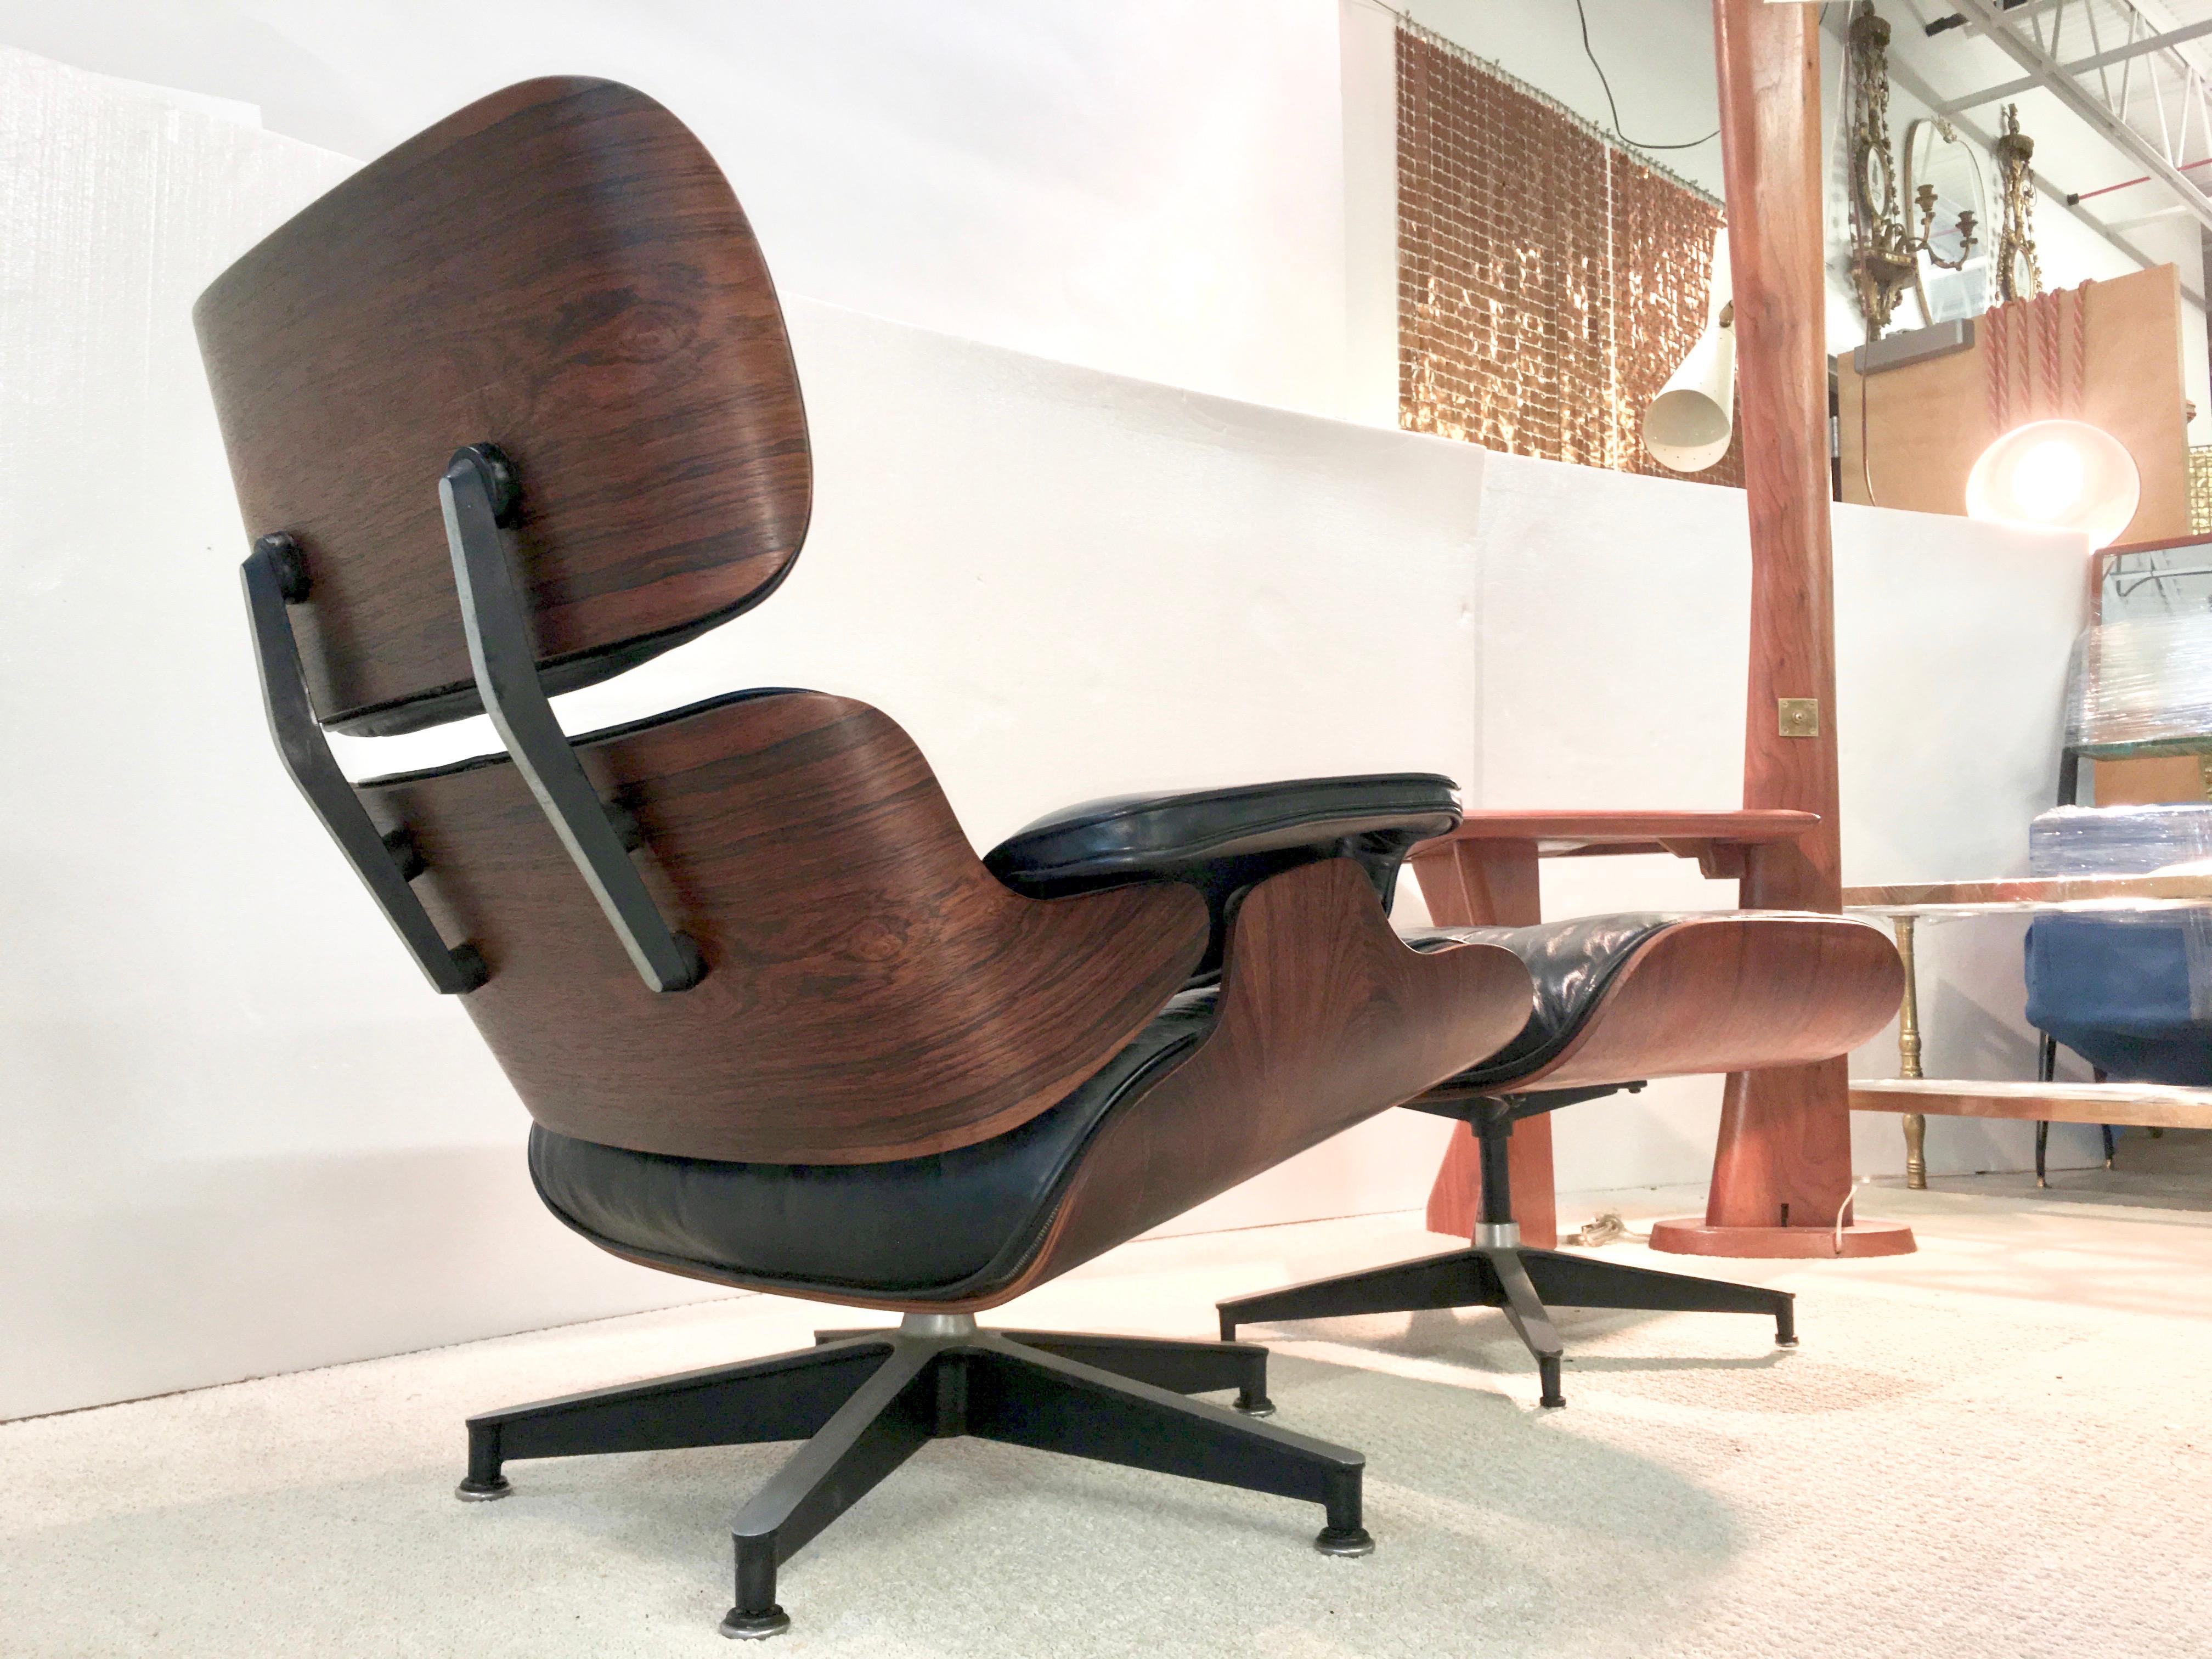 Aluminum Early Eames Lounge Chair and Ottoman by Herman Miller